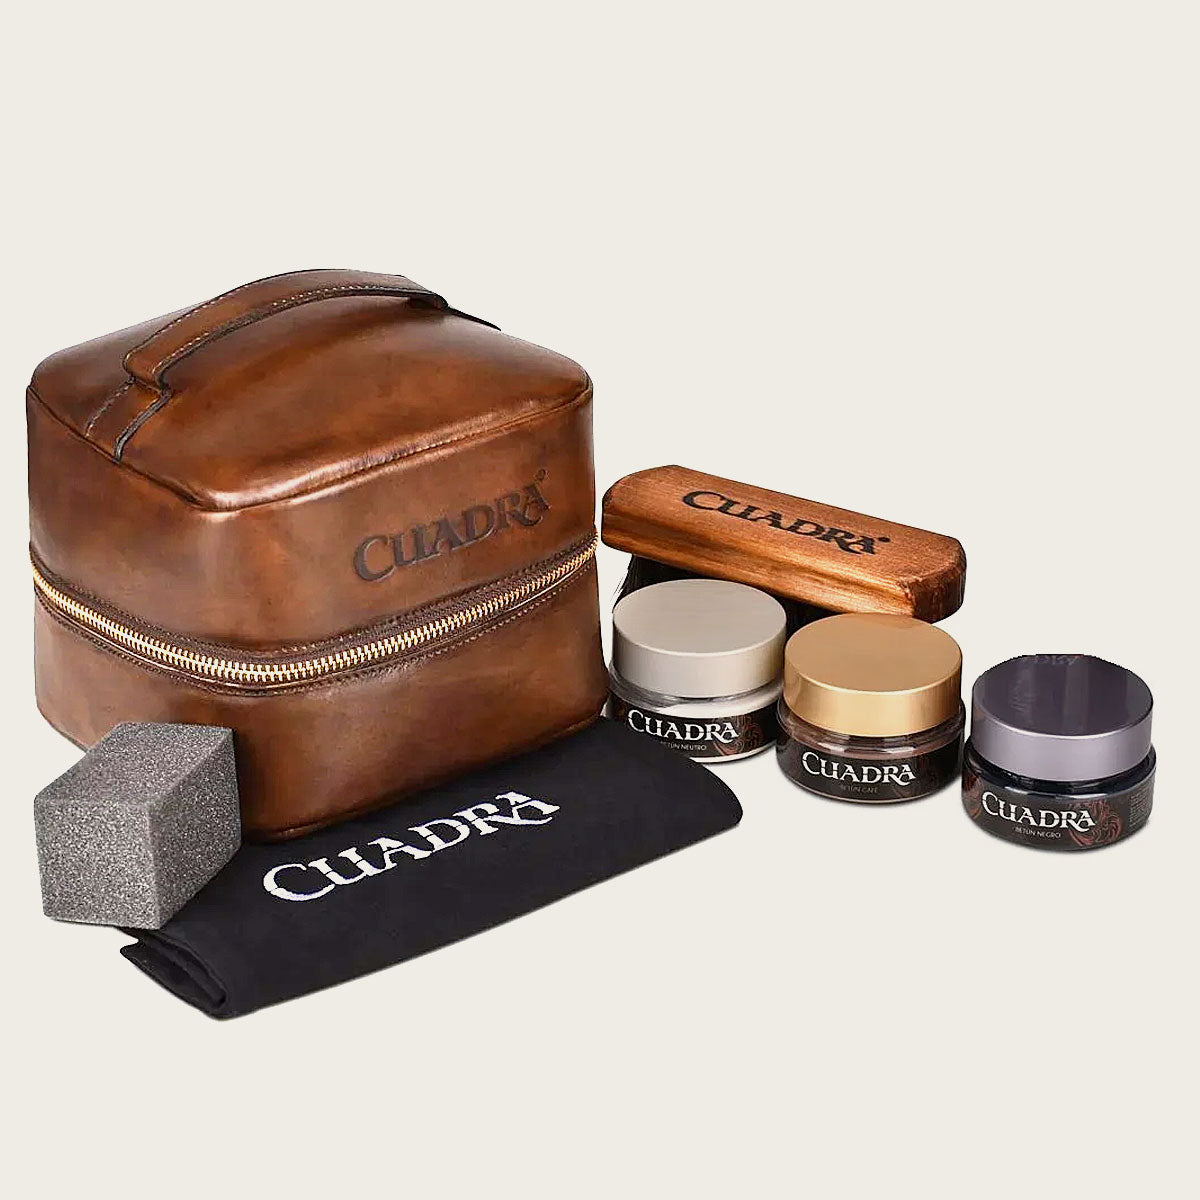 Elevate your leather care routine with our exquisite bovine leather Cuadra Cleaning Kit.